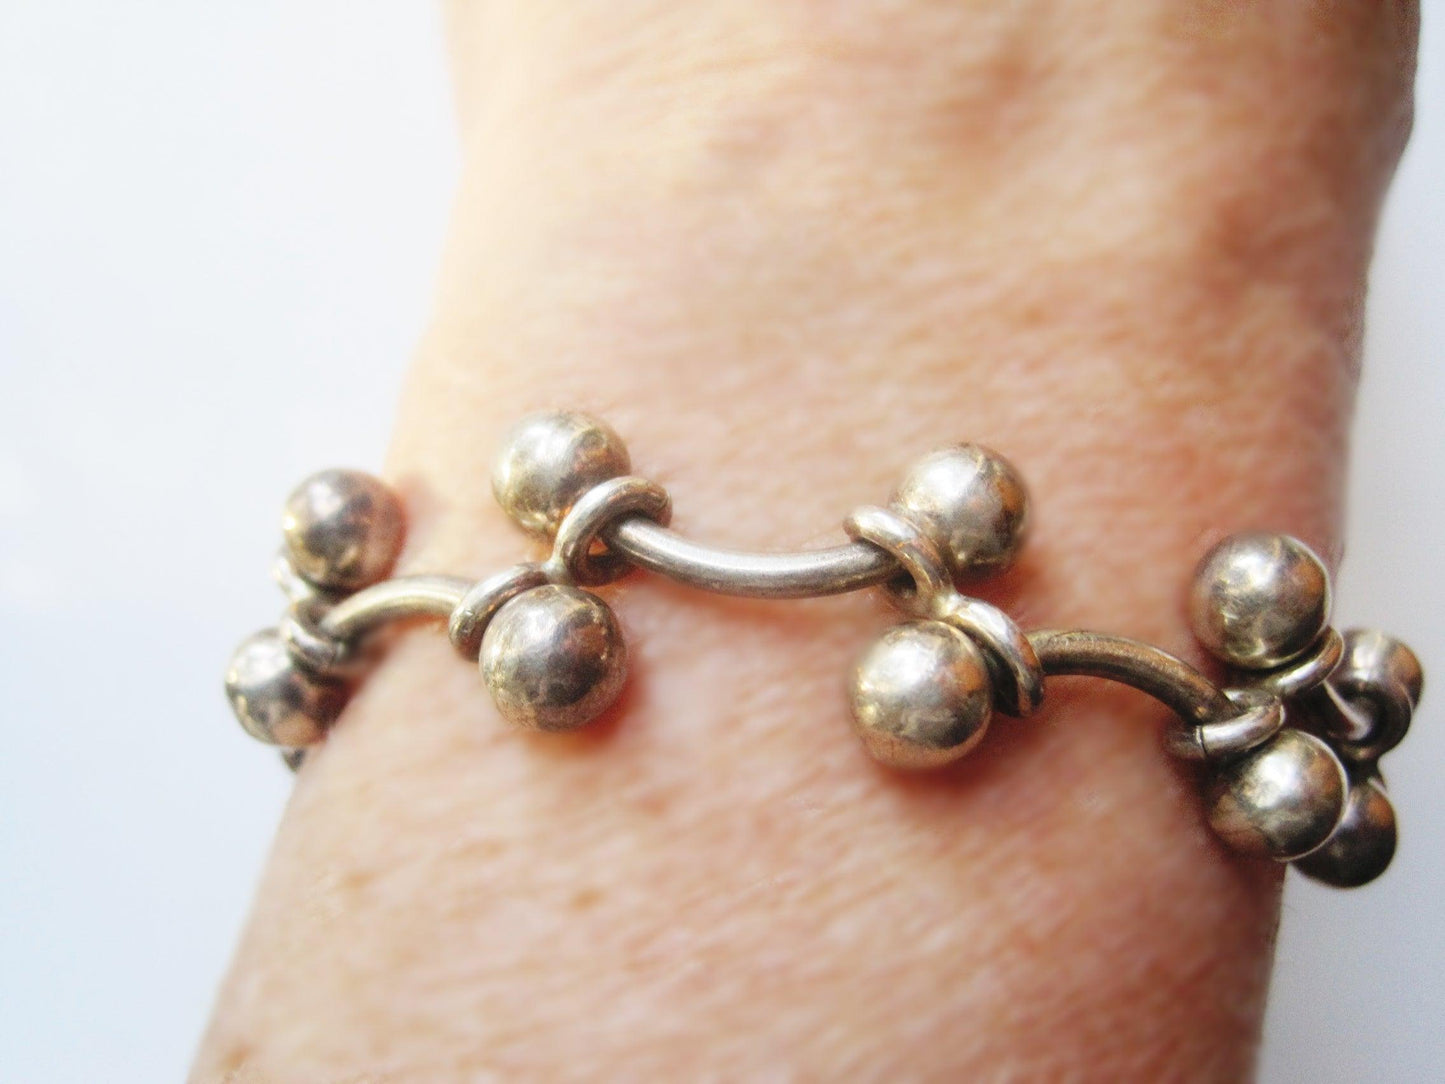 Vintage Sterling Silver Ball and Link Chain Bracelet - Anteeka